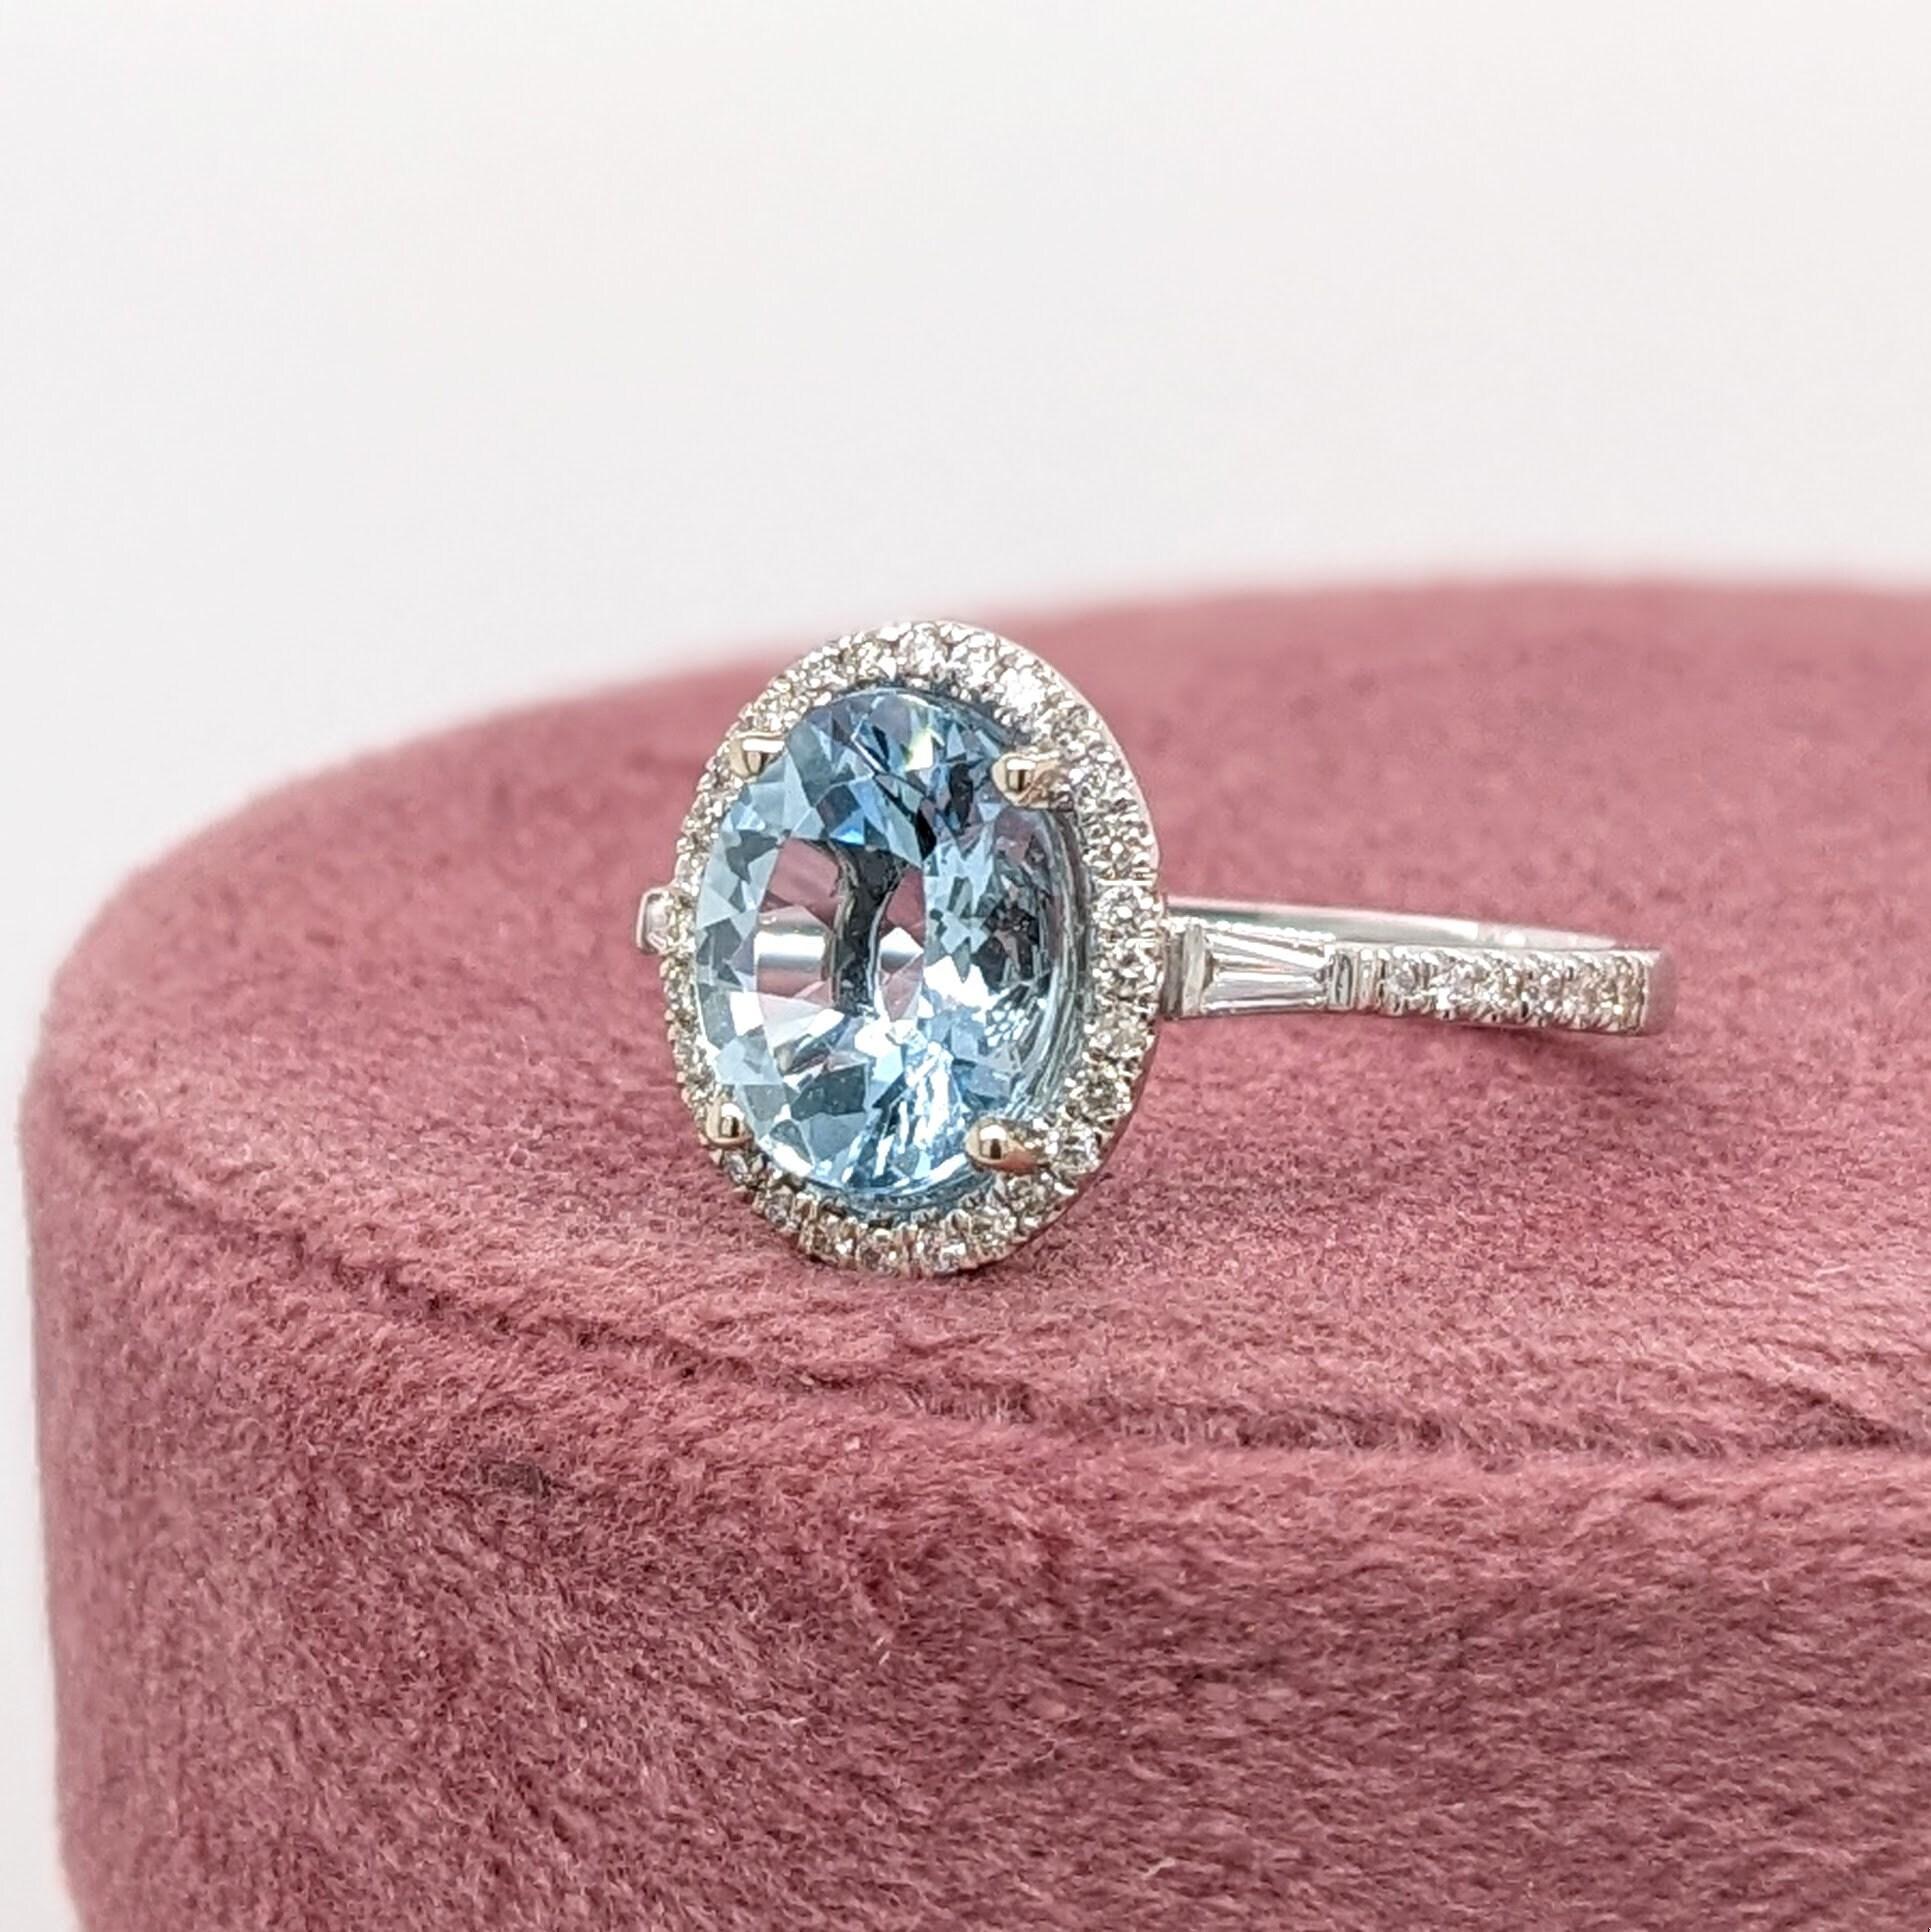 Art Deco Beautiful Aquamarine Ring in Solid 14K White Gold with a Halo of Natural Diamond